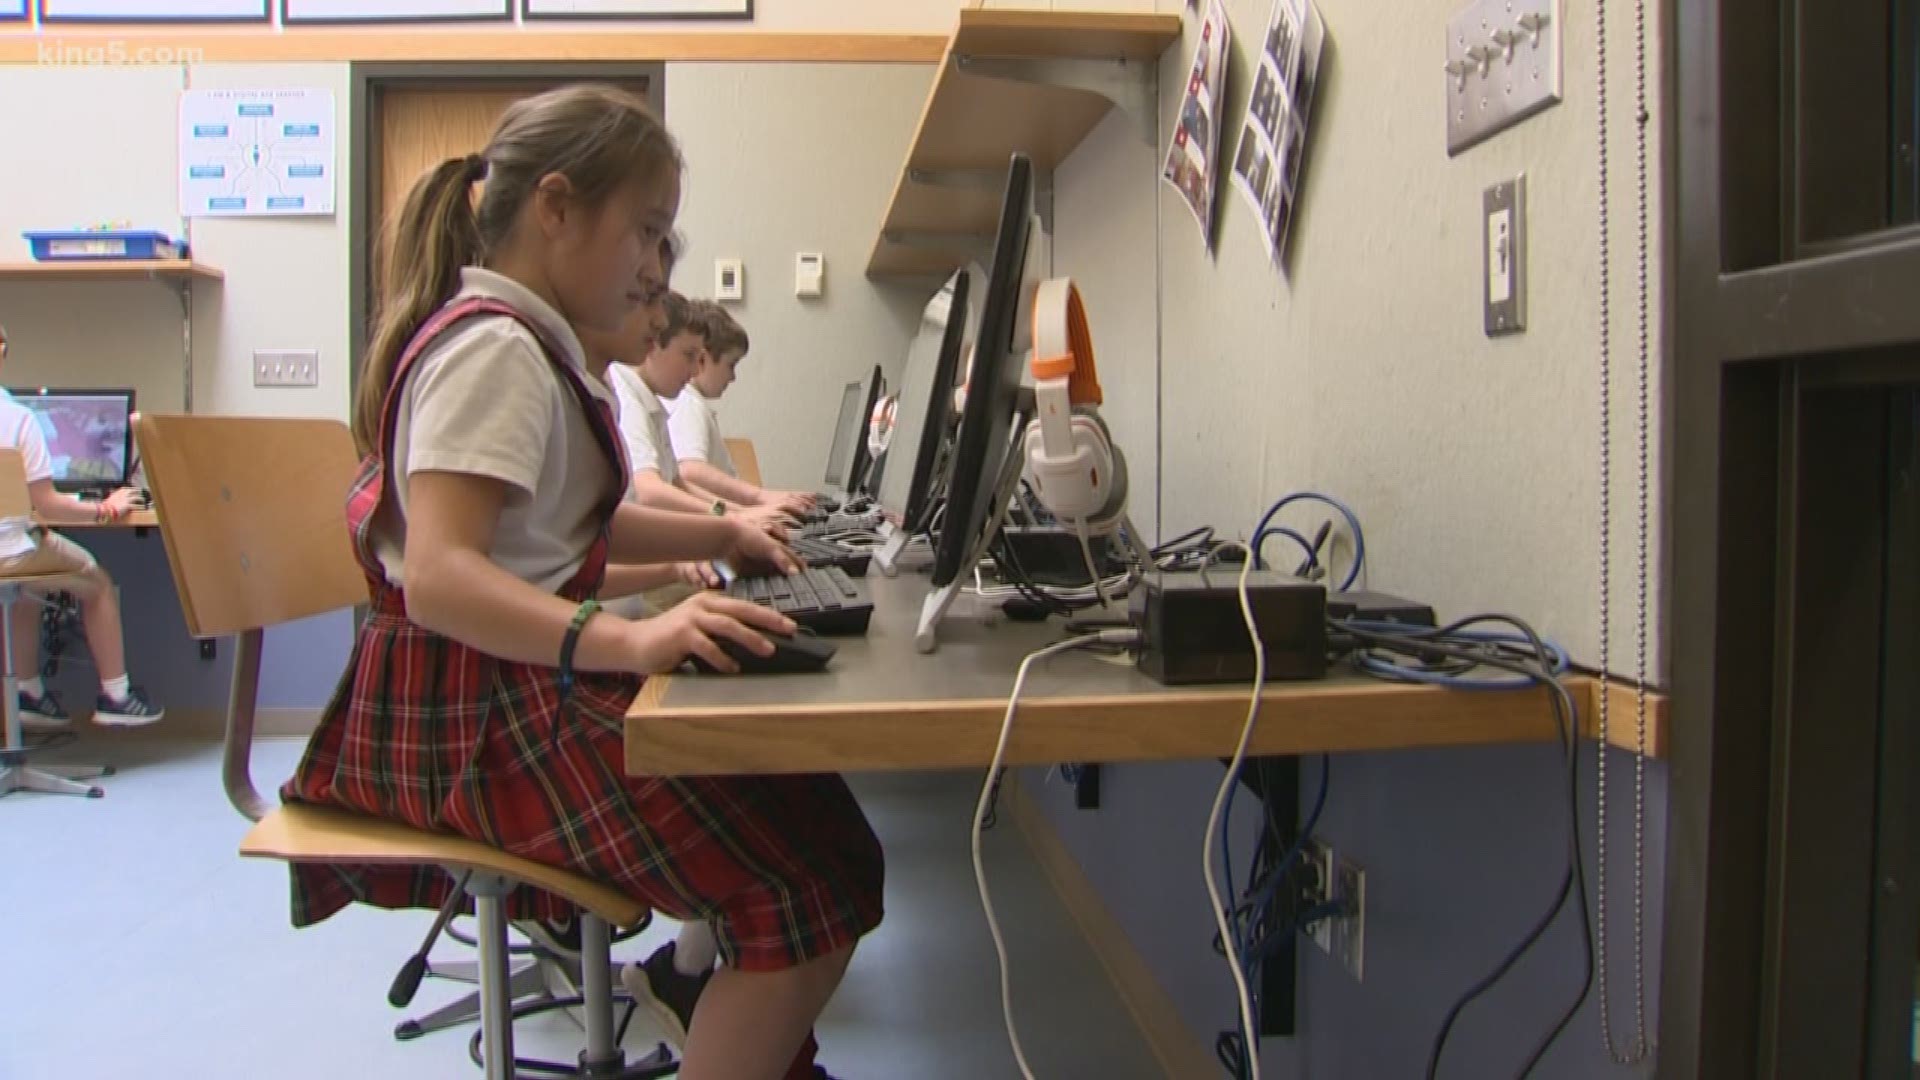 A King County school has become a showcase for integrating technology into the classroom. It's caught the attention of education leaders overseas who have been coming to campus to learn how it's working. King 5's Amy Moreno went into the classroom to check it out.